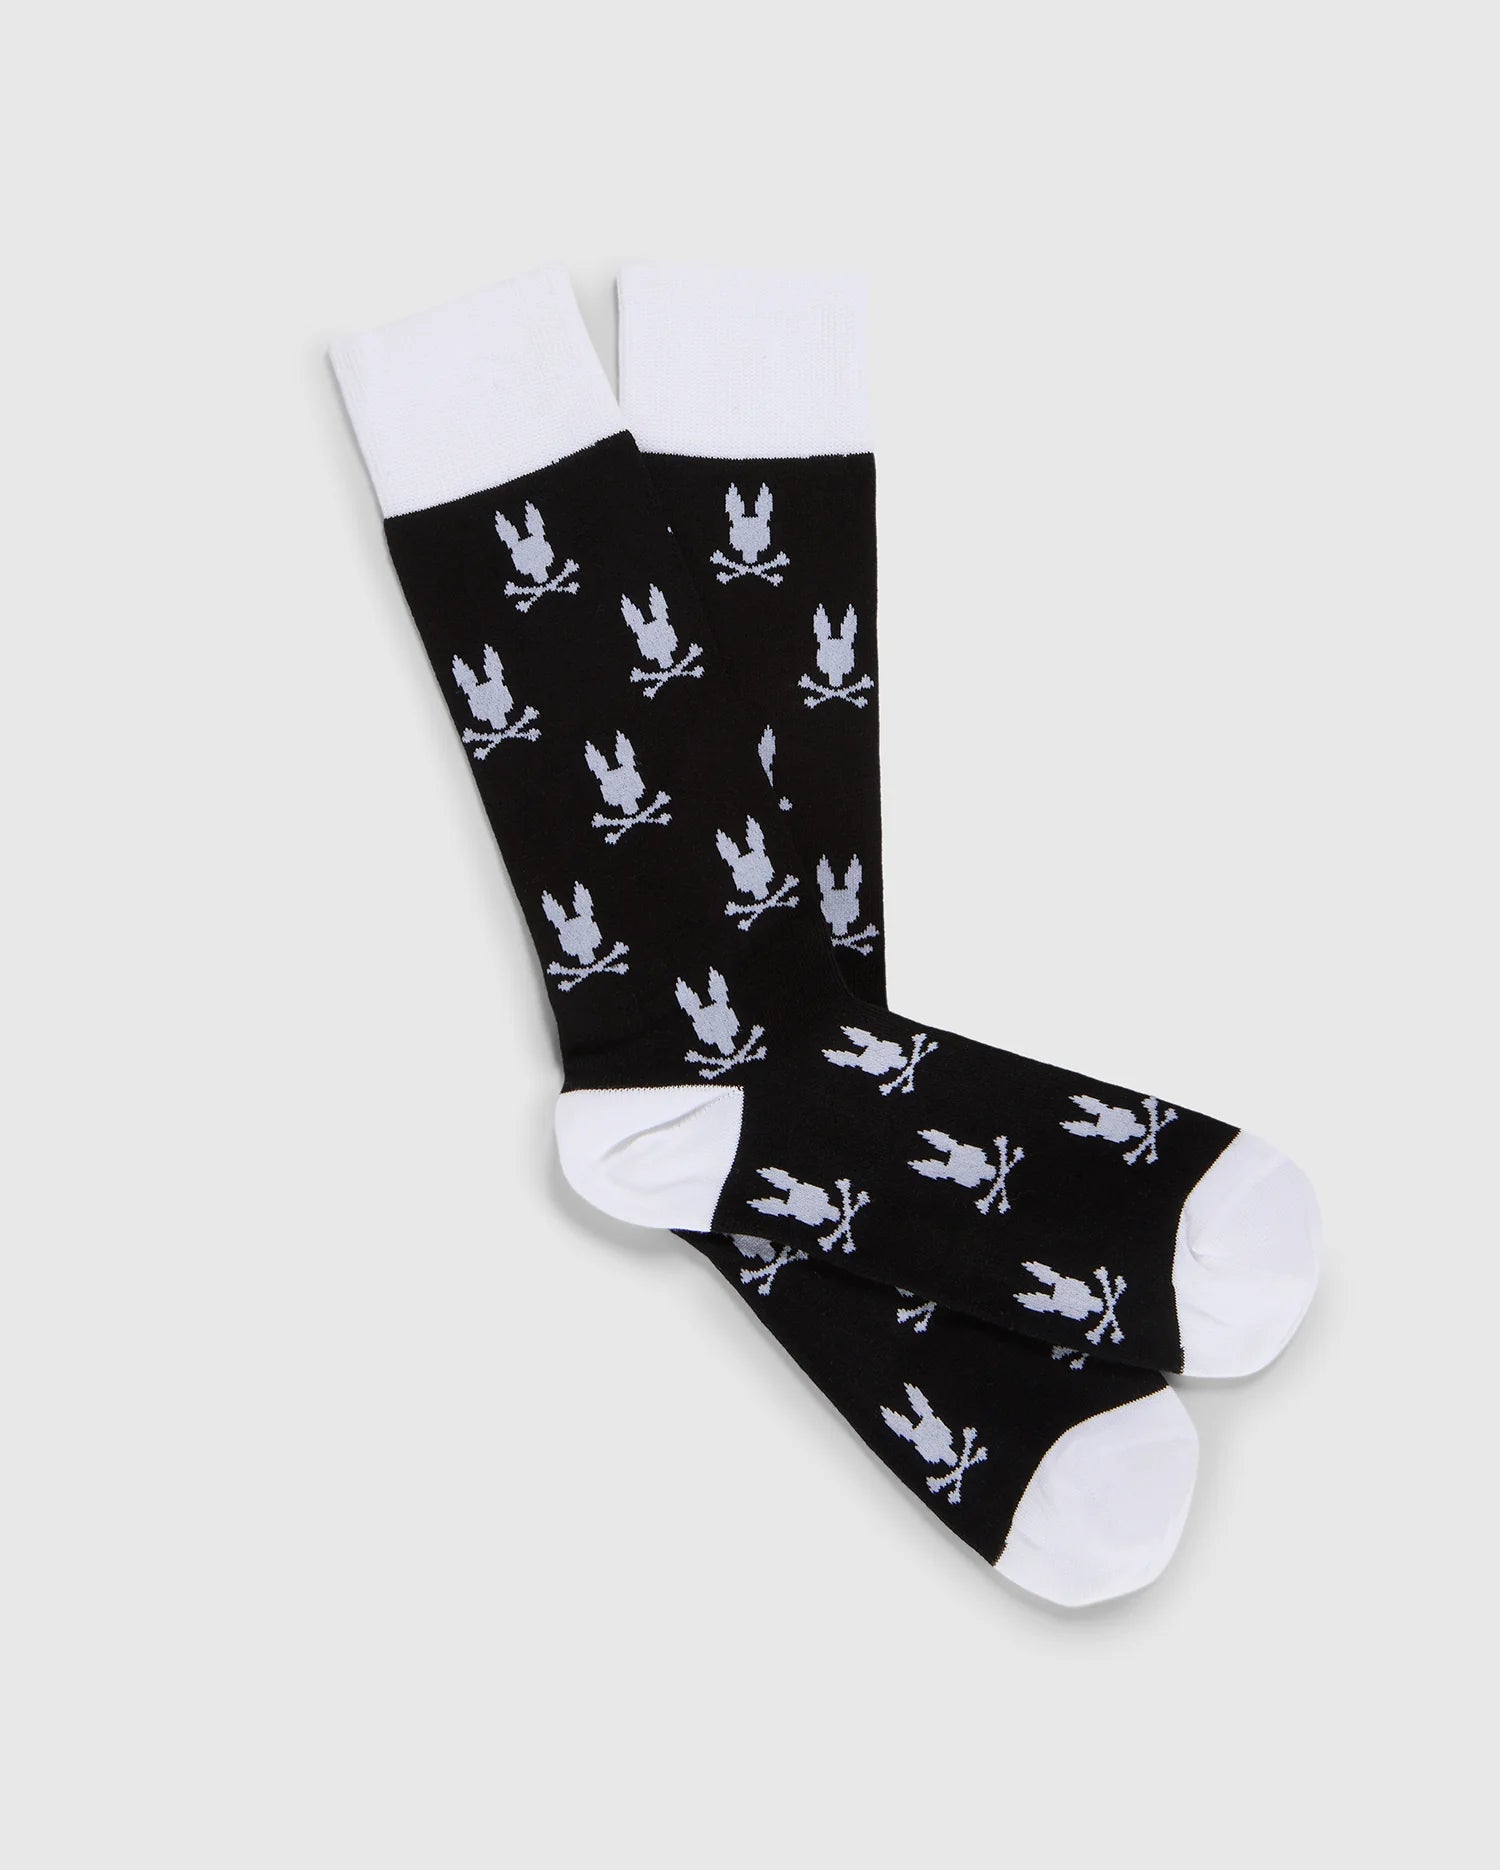 A pair of black dress socks with a jacquard-knit Bunny pattern and crossed swords, crafted from luxurious Peruvian Pima cotton. The toes, heels, and cuffs are white, contrasting with the black body. The MENS DRESS SOCK - B6F750B2SO by Psycho Bunny are laid flat on a plain light gray background.